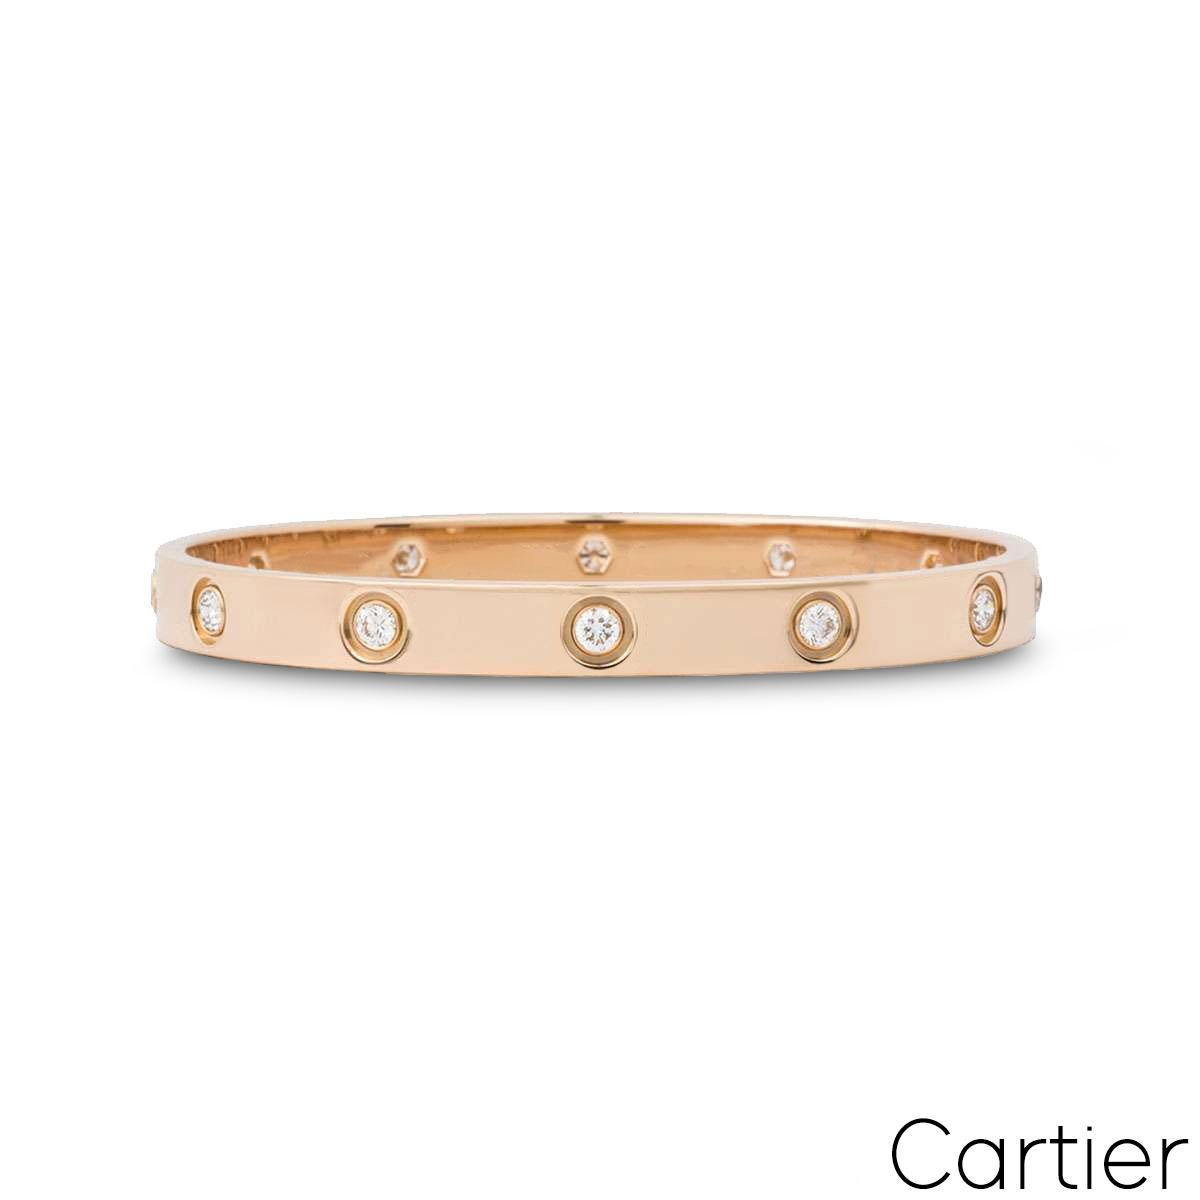 An 18k rose gold full diamond bracelet by Cartier from the Love collection. The bracelet is set with 10 round brilliant cut diamonds circulating the outer edge throughout in a rubover setting totalling 0.96ct. The bangle is a size 16 and features